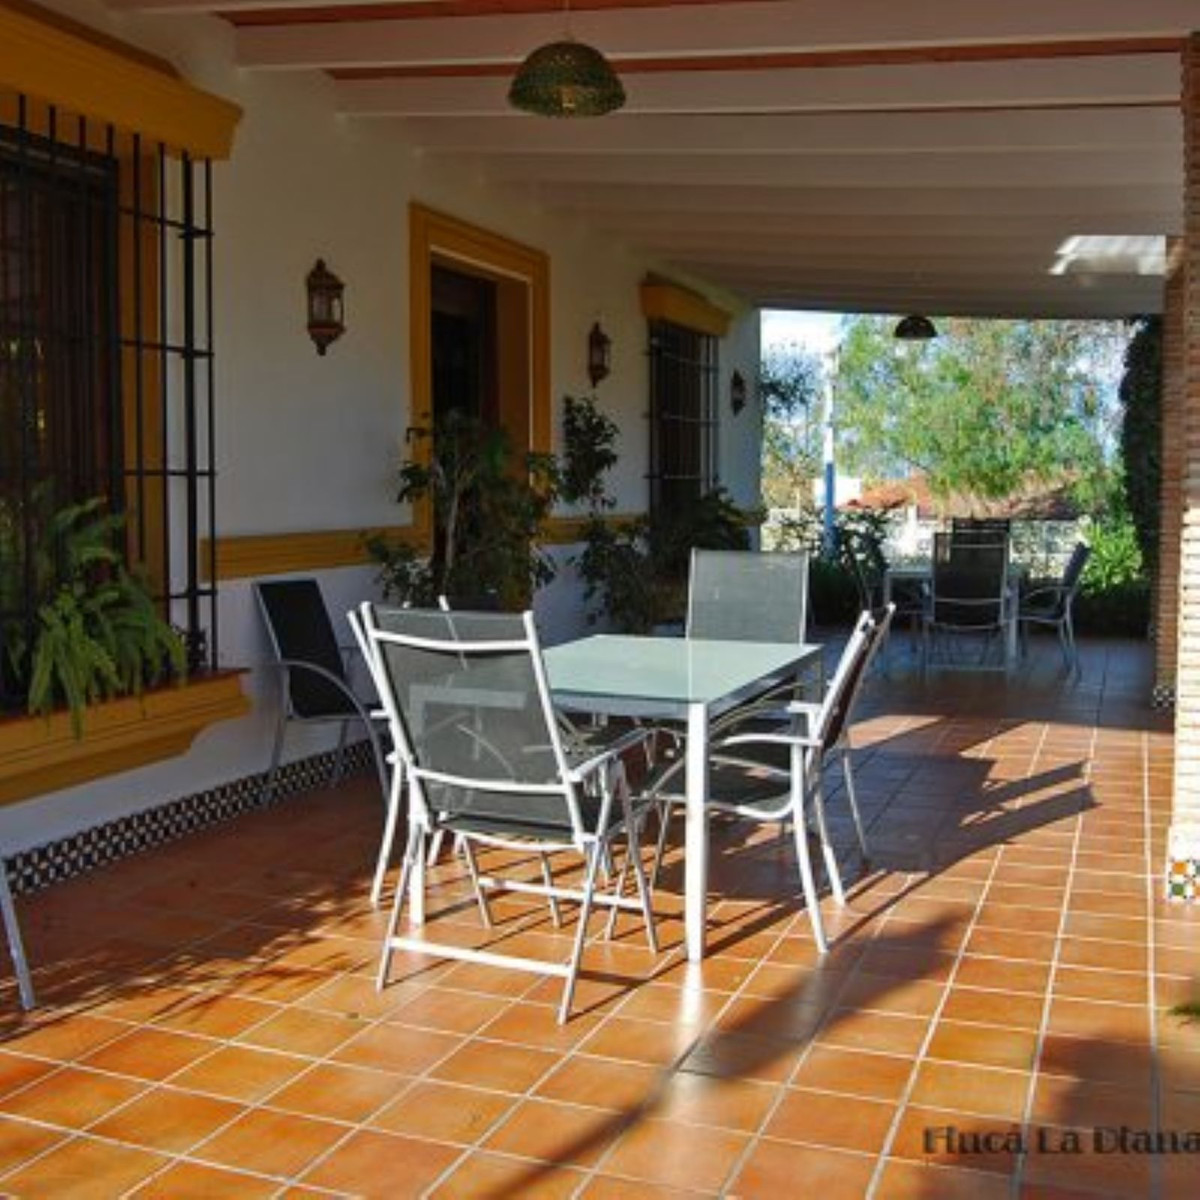 Andalusian Villa located on a plot of 12,000 square meters.